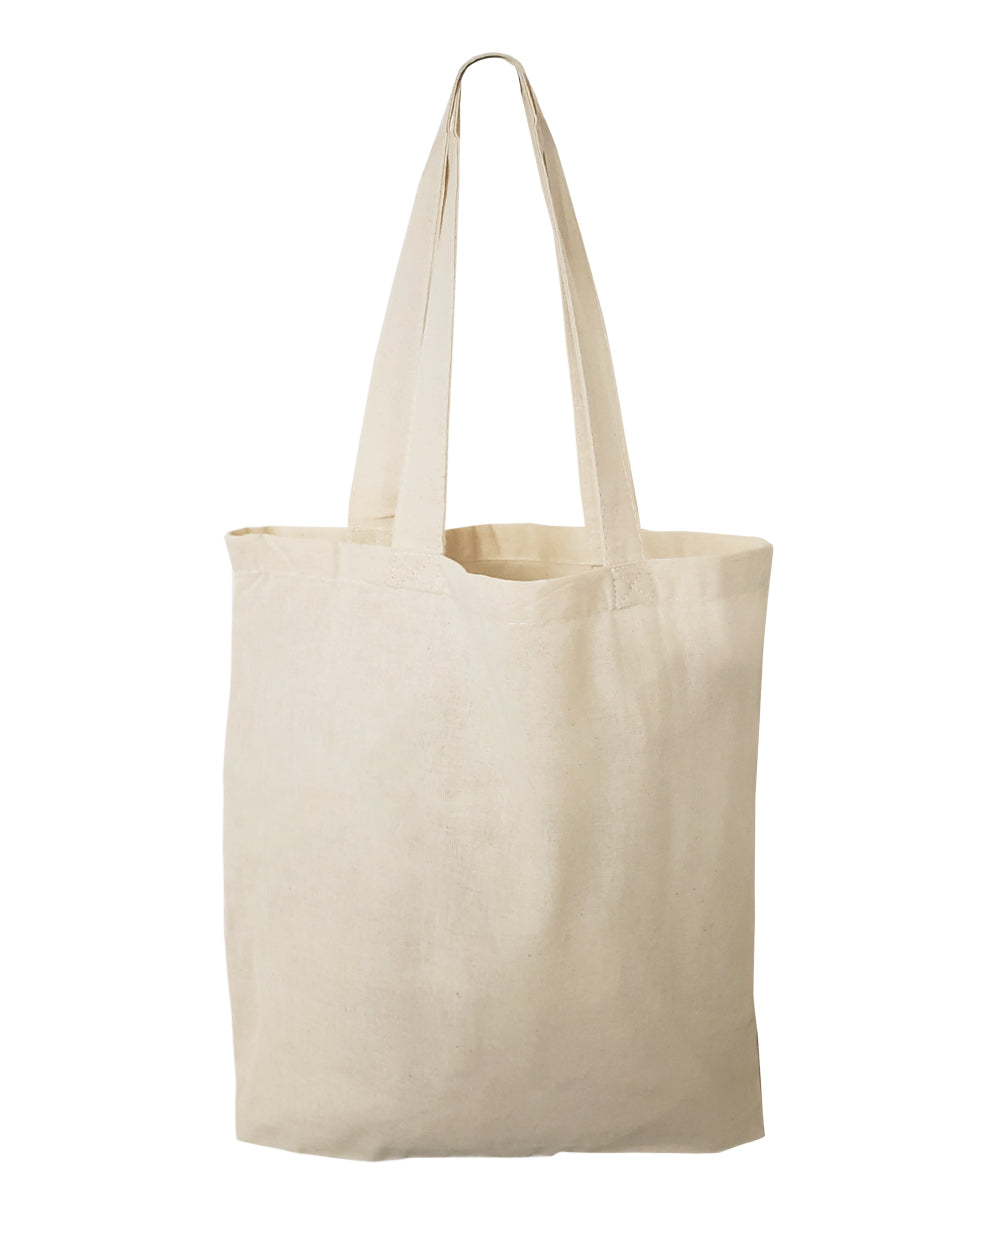 Small Size Cotton Totes Natural Color